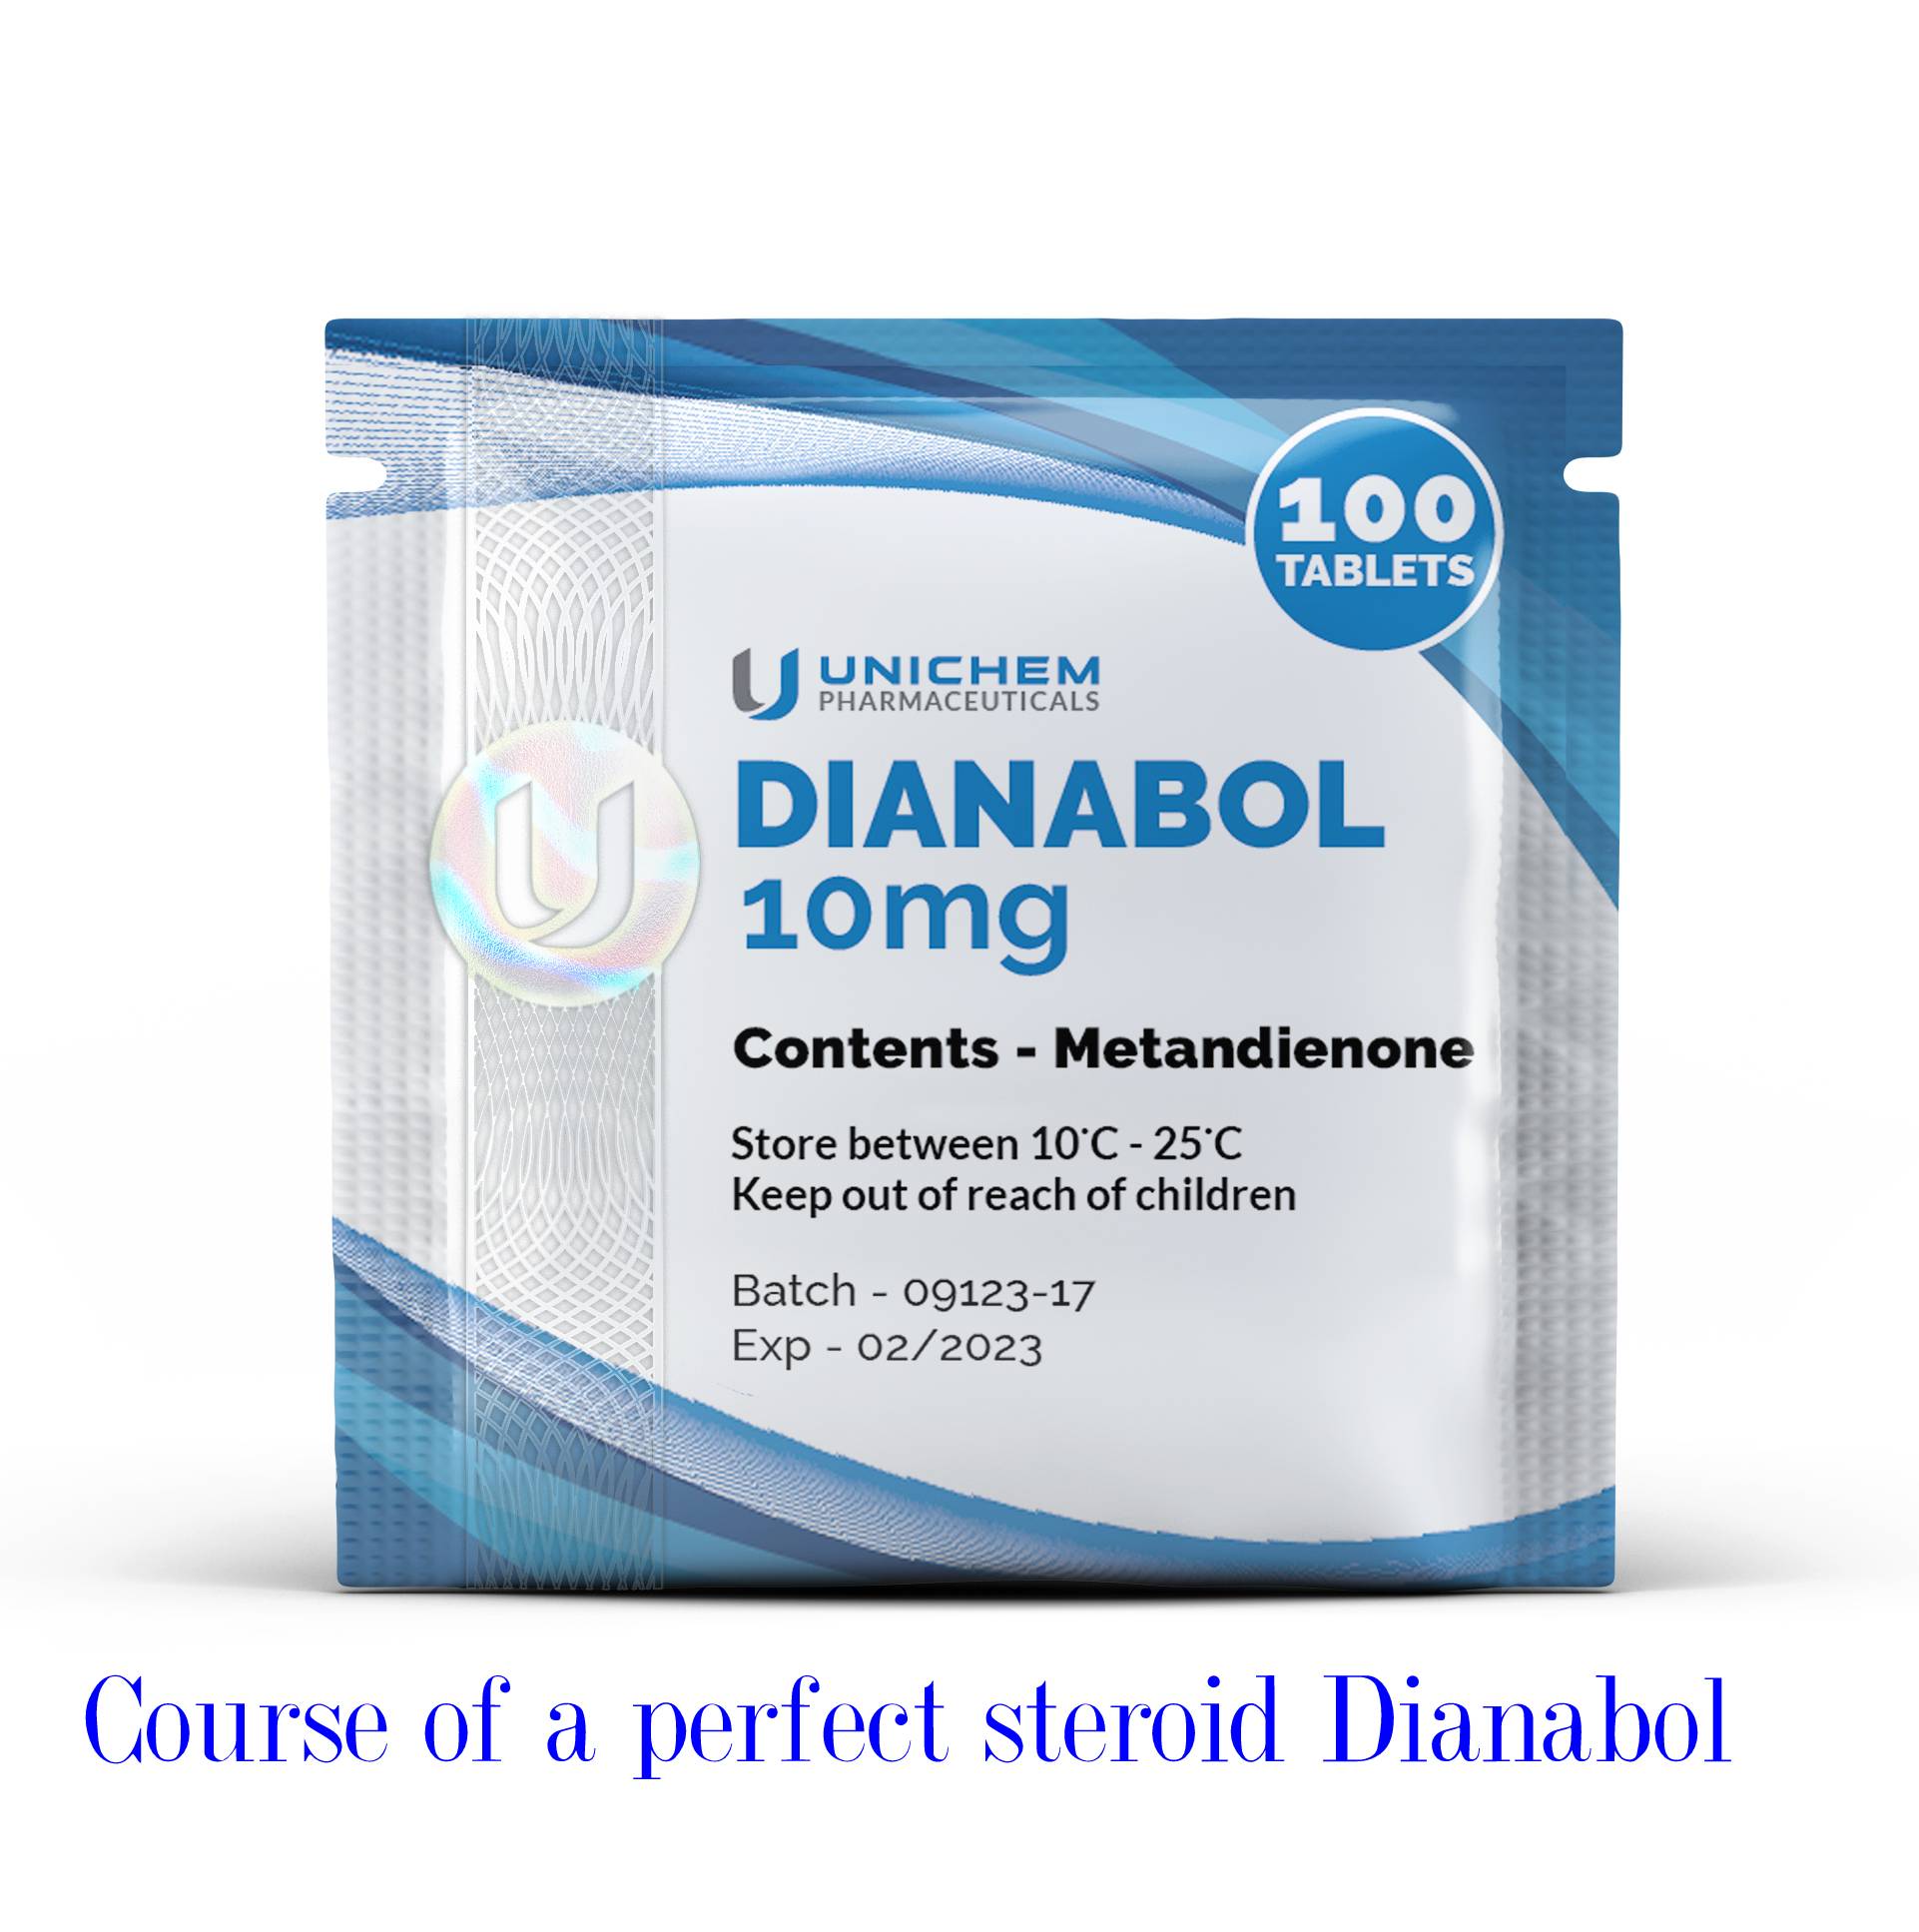 Course of a perfect steroid Dianabol